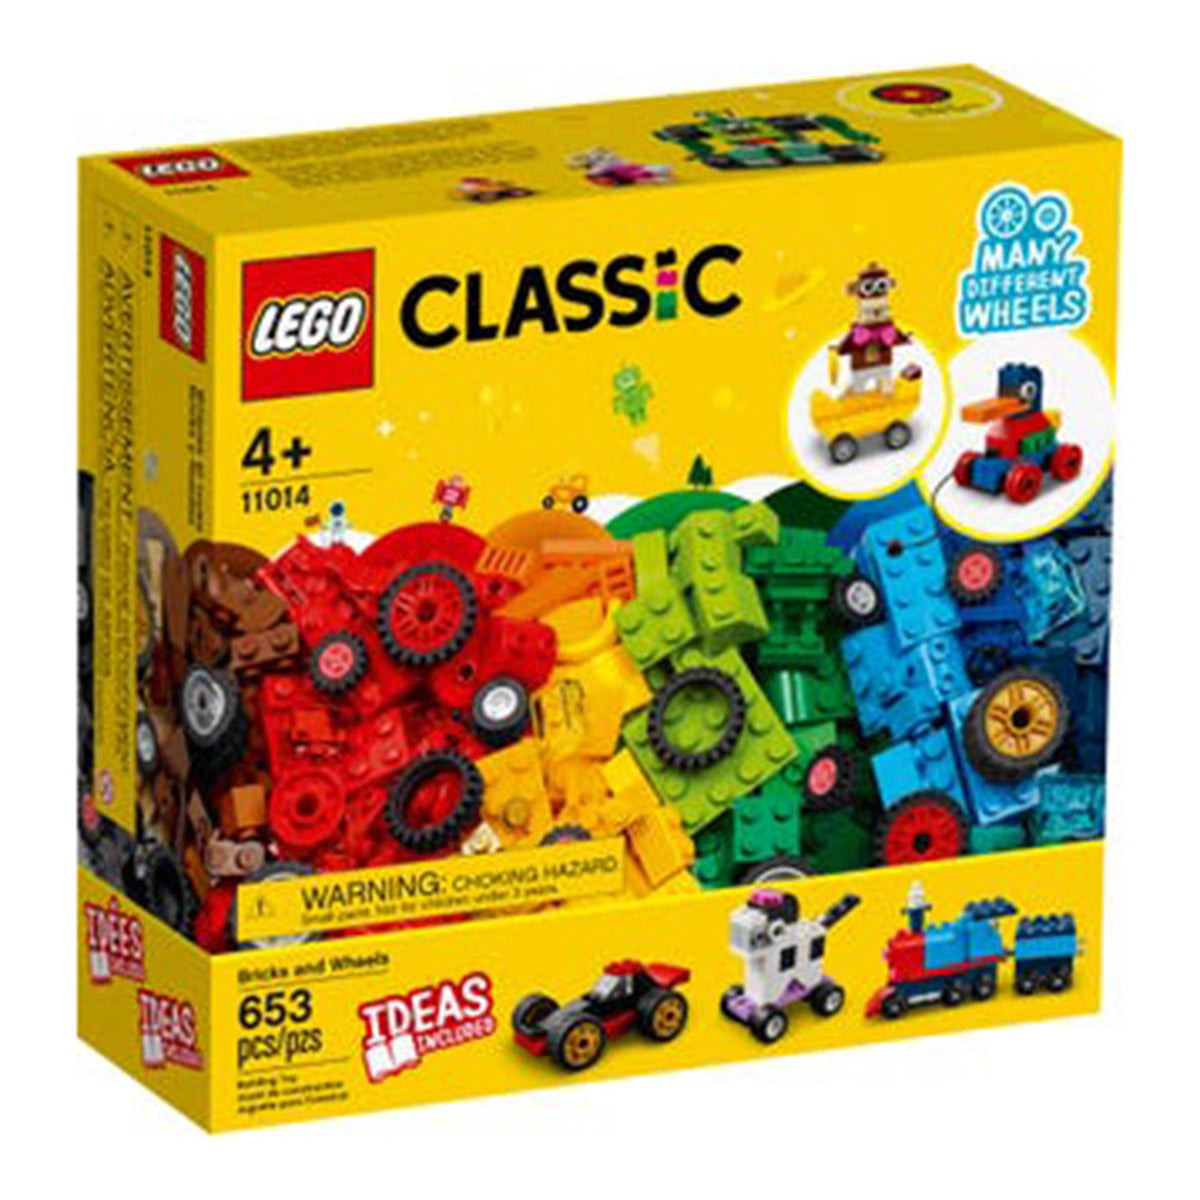 LEGO JOUET K.I.D. INC Toys & Games LEGO Classic Bricks and Wheels, 11014, Ages 4+, 653 Pieces 673419336239